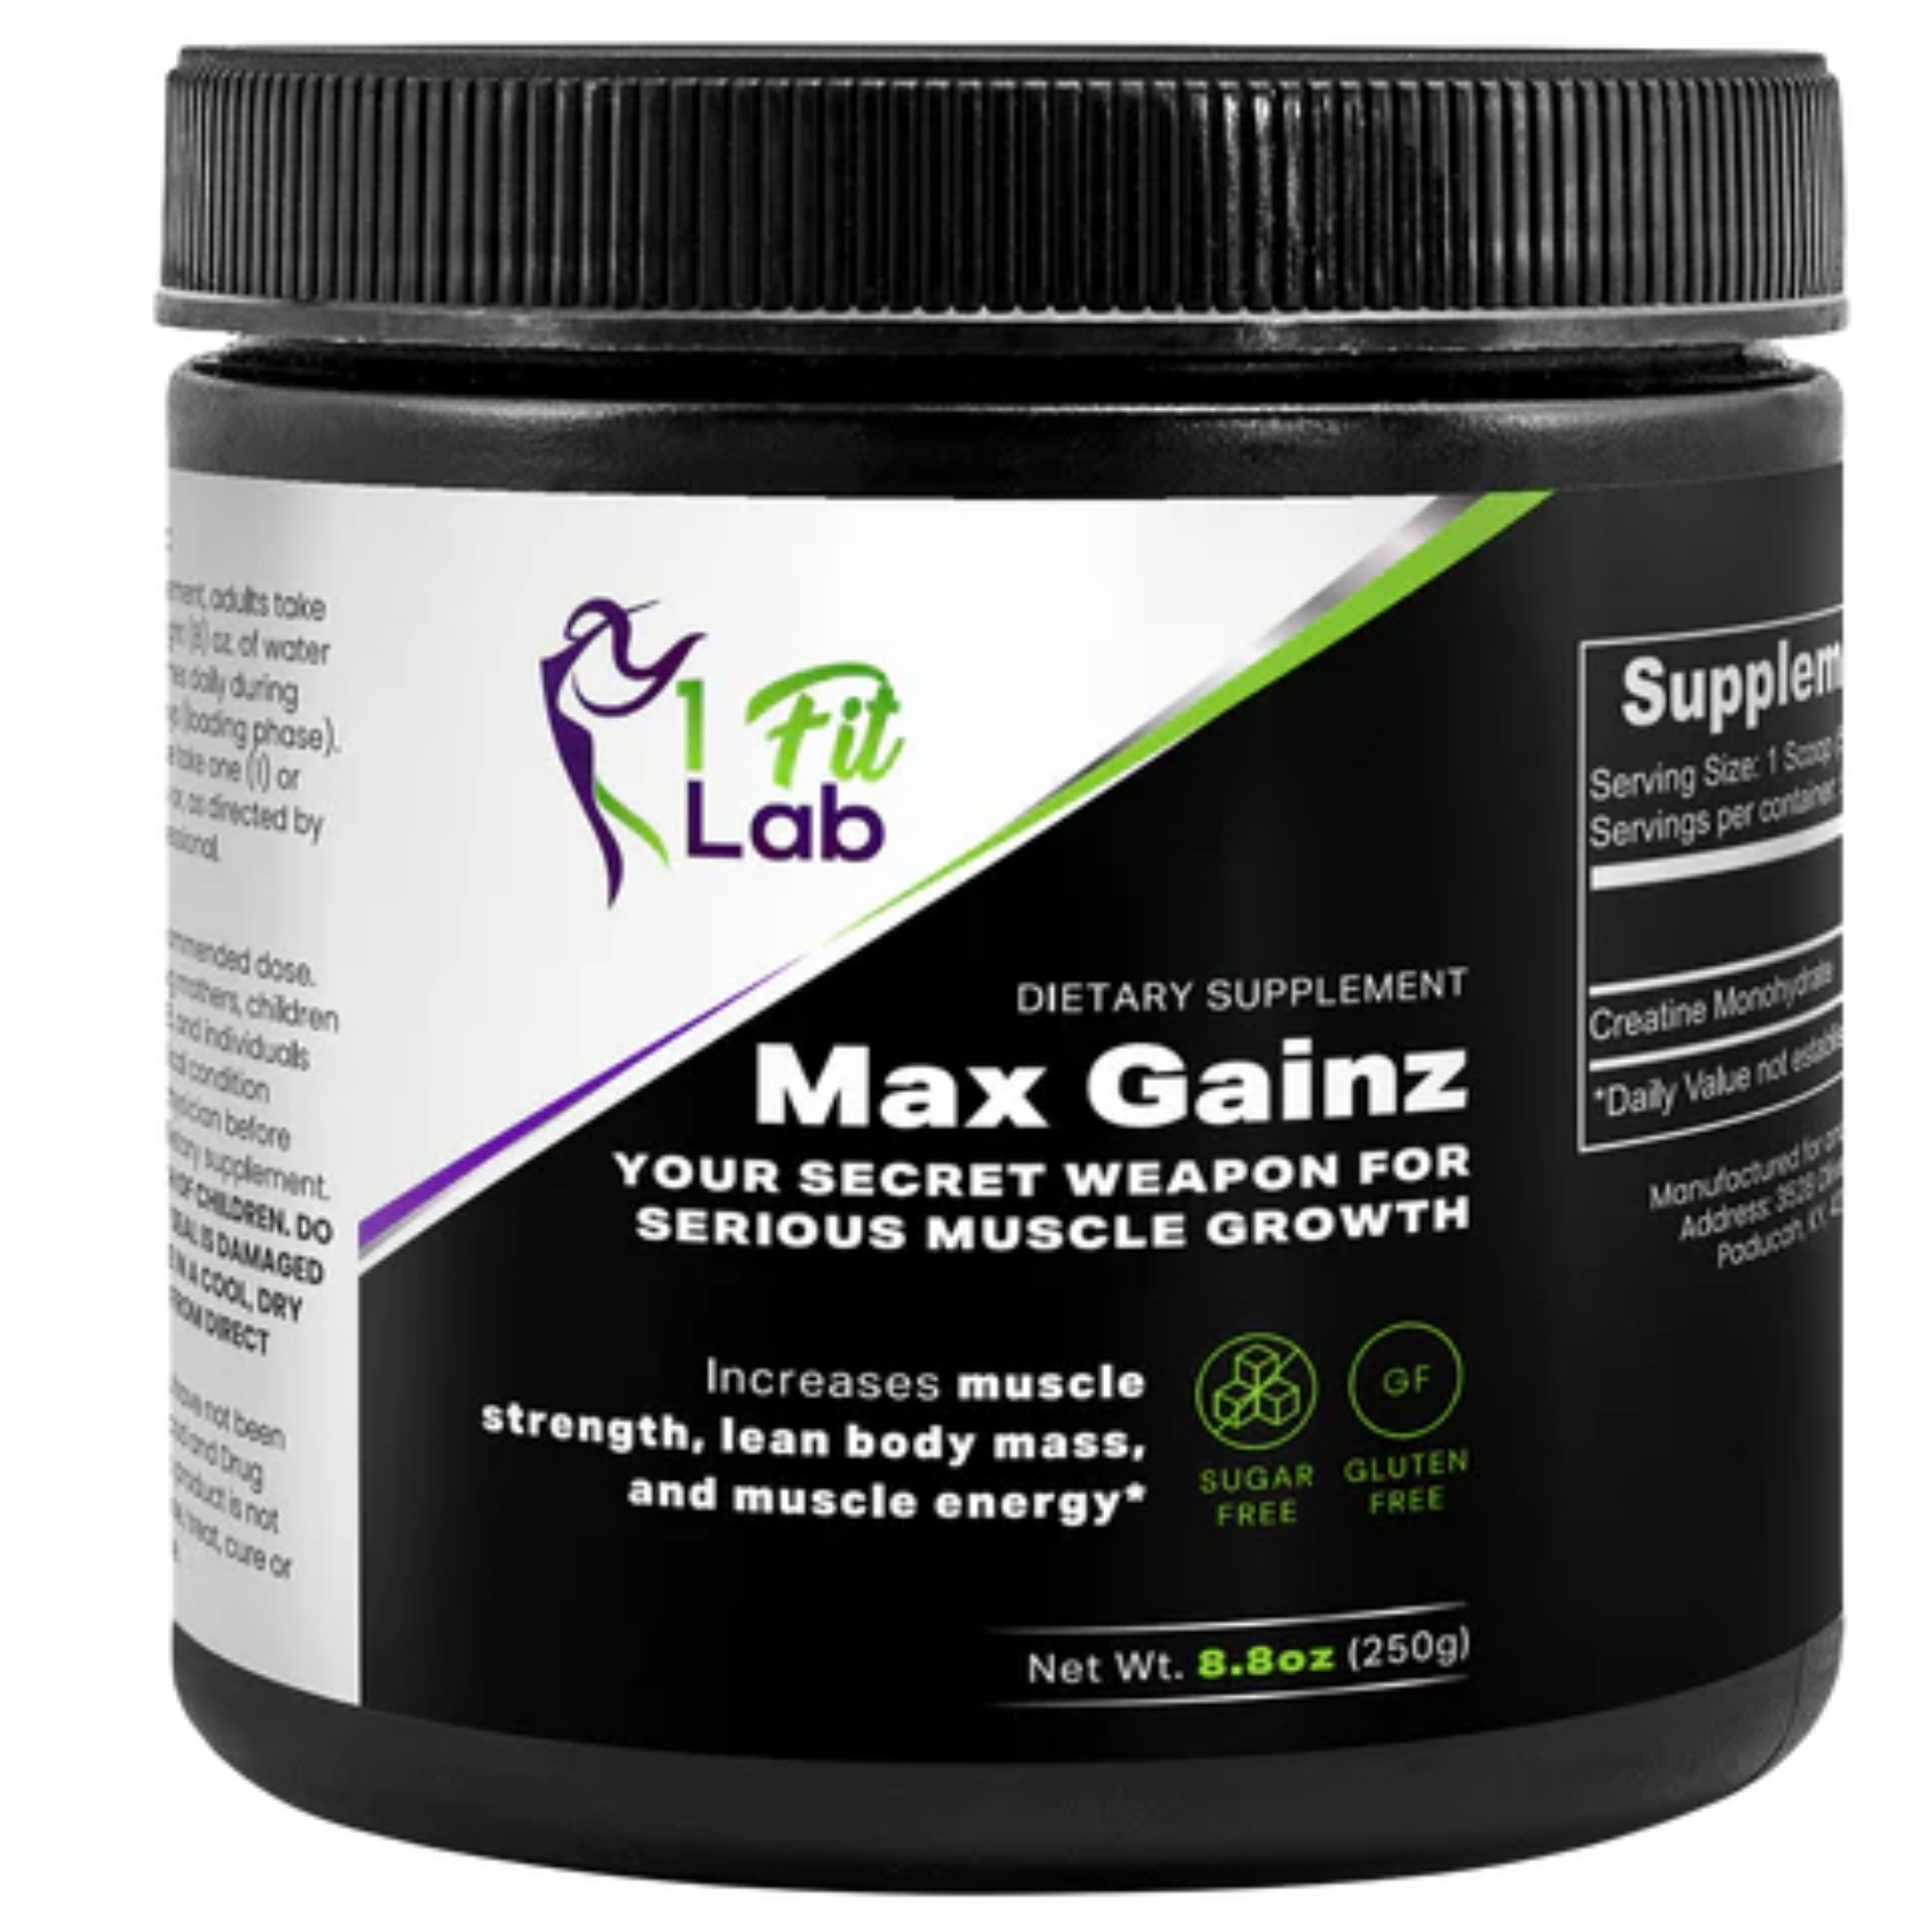 Bottle of Max Gainz Creatine Monohydrate supplement for muscle growth and recovery